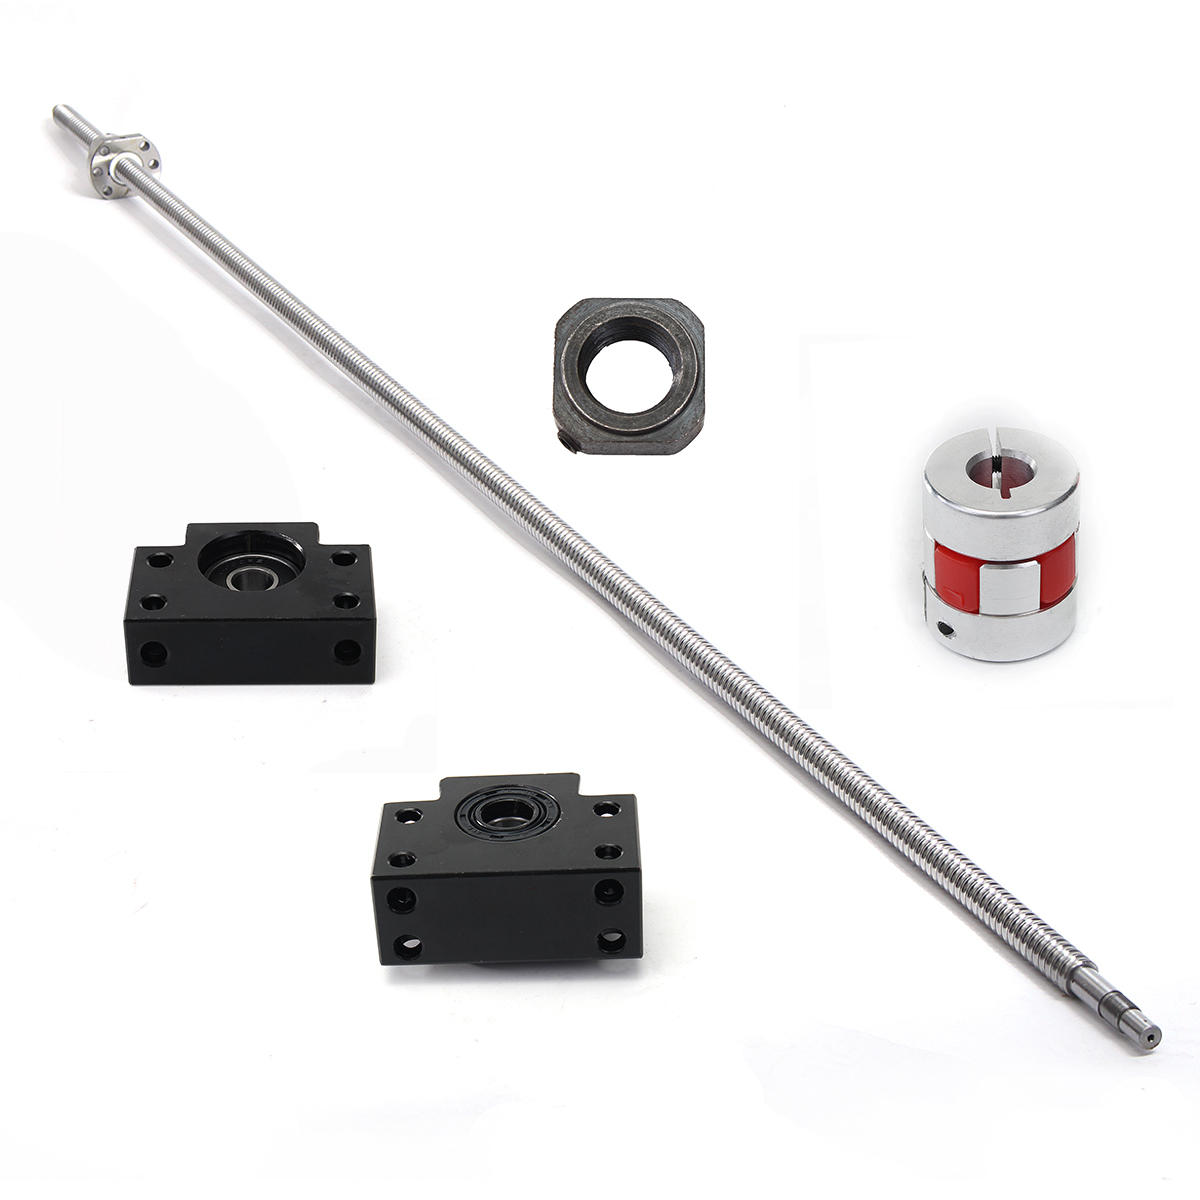 Image of RM1605 1500mm Ball Screw with BK12 BF12 Ball Screw End Supports and Coupler Set